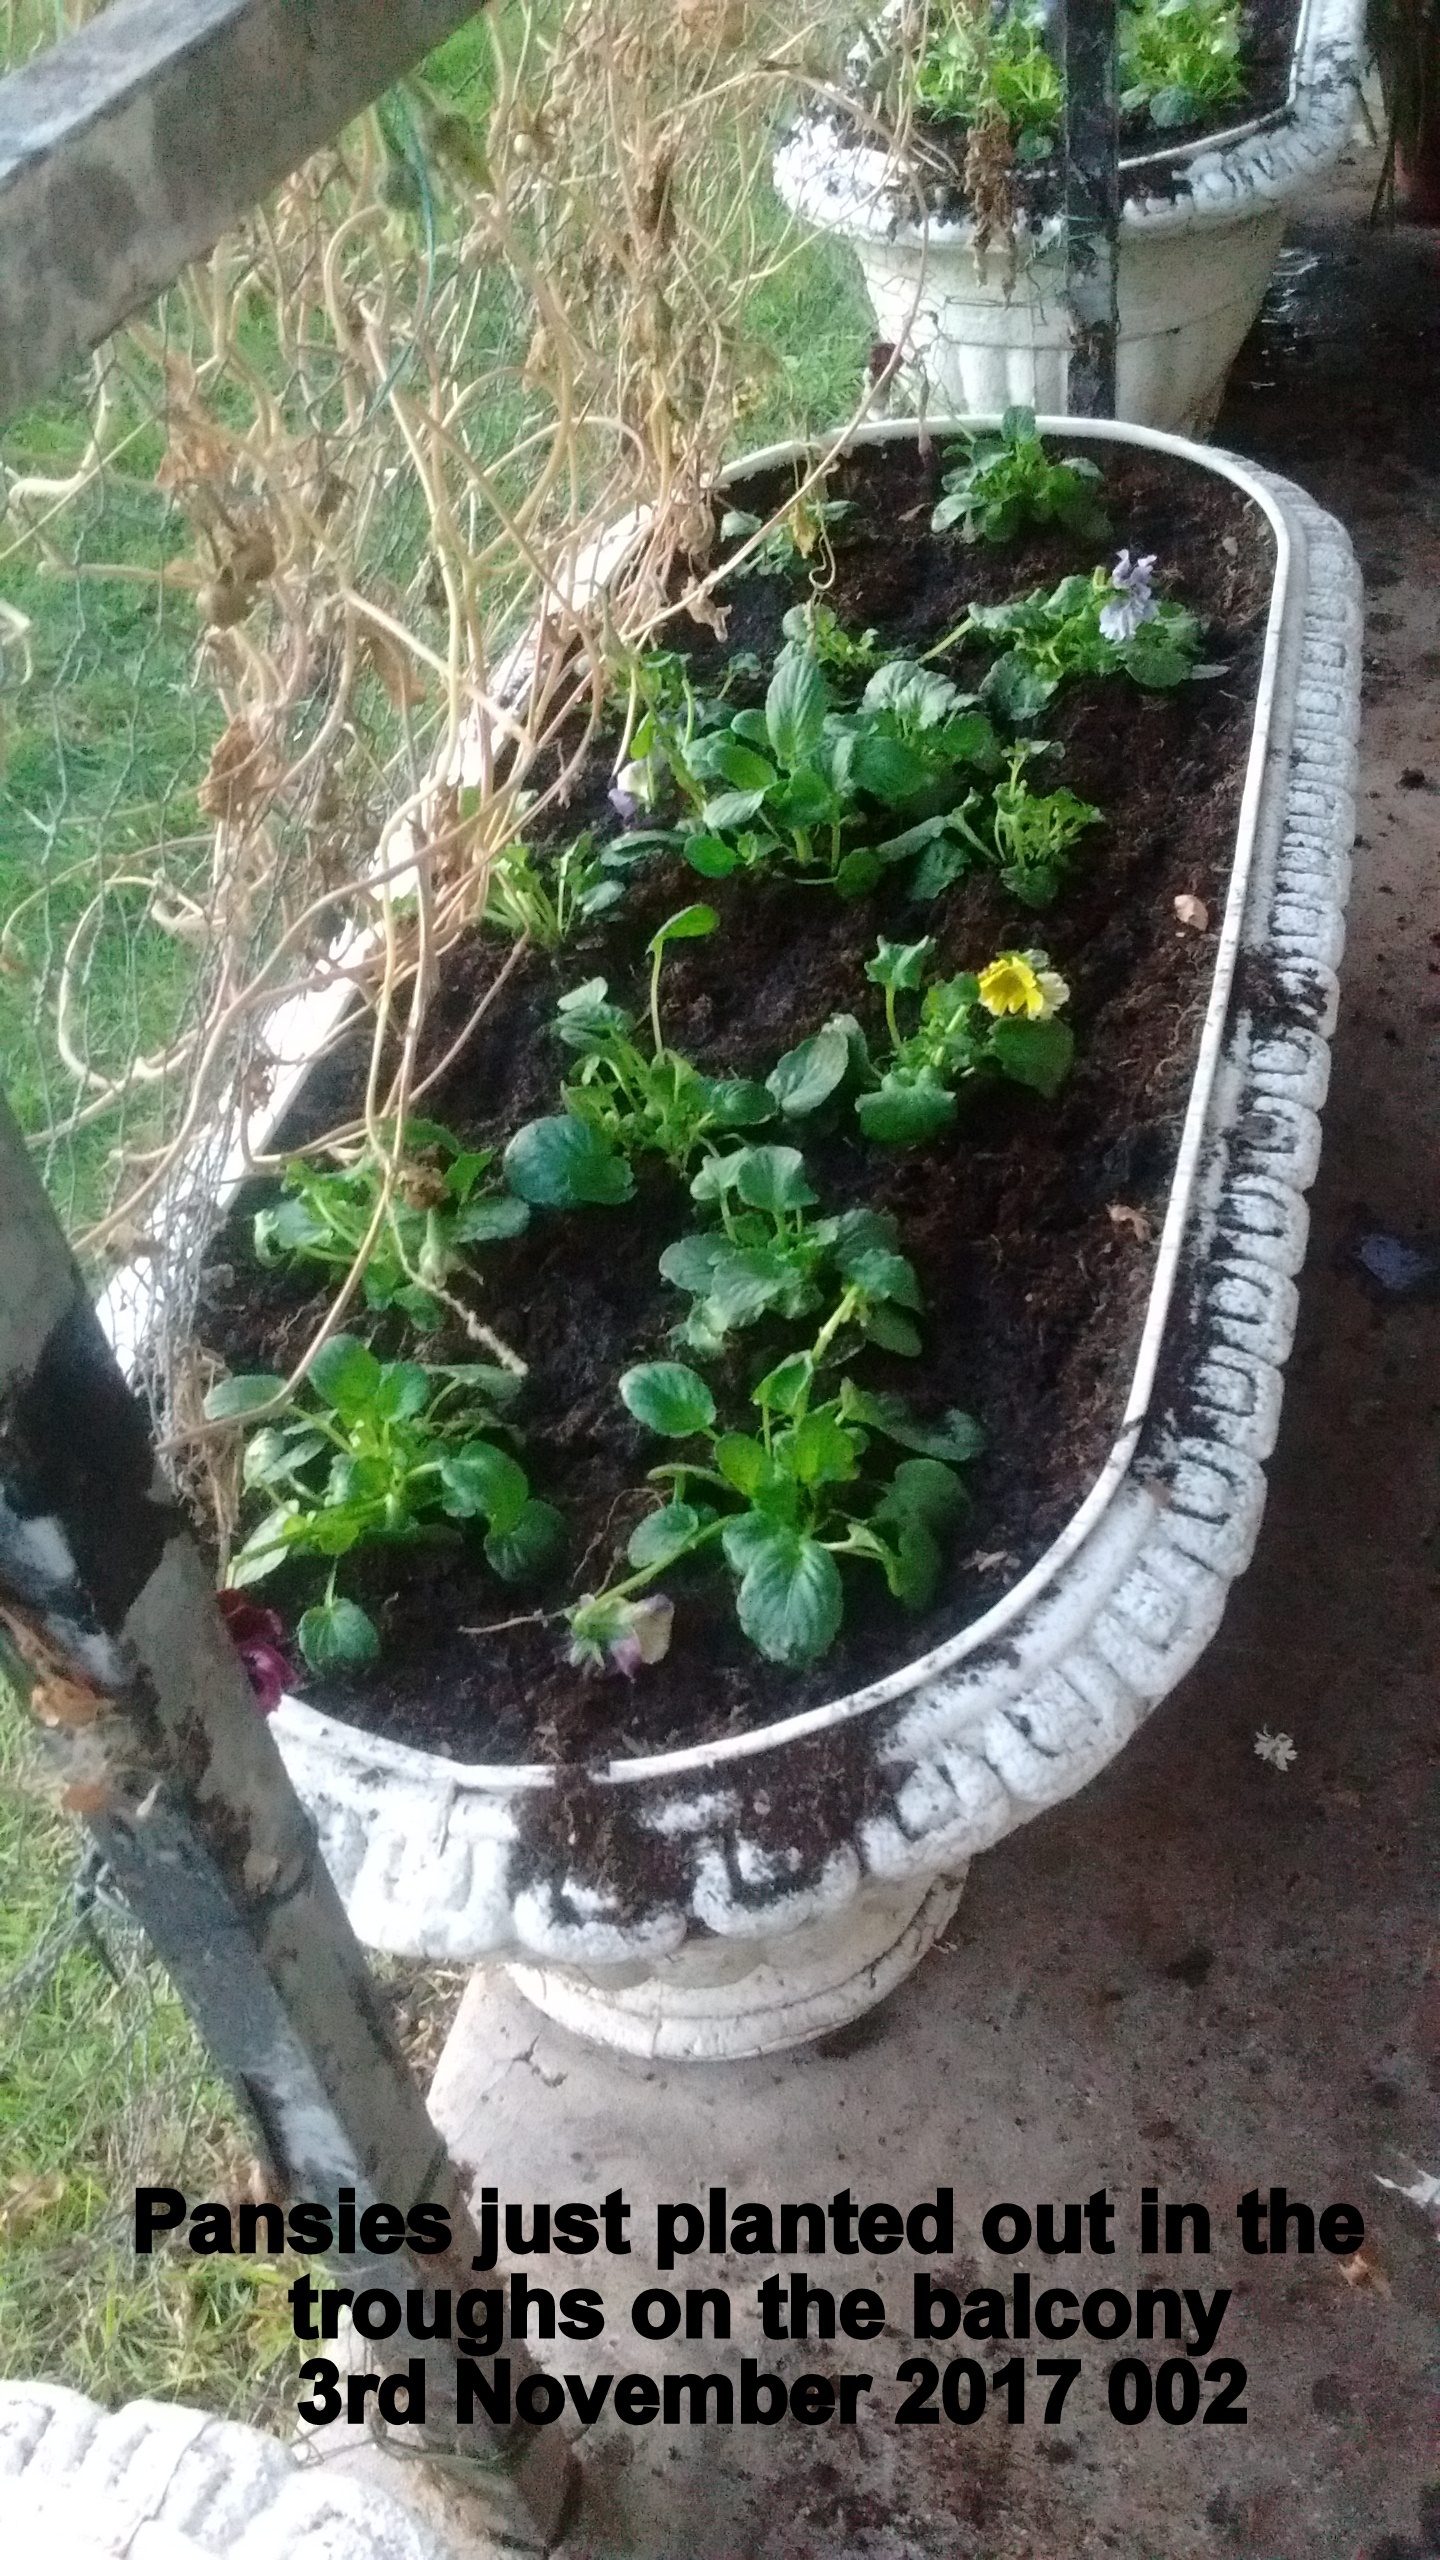 Pansies just planted out in the troughs on the balcony 3rd November 2017 002